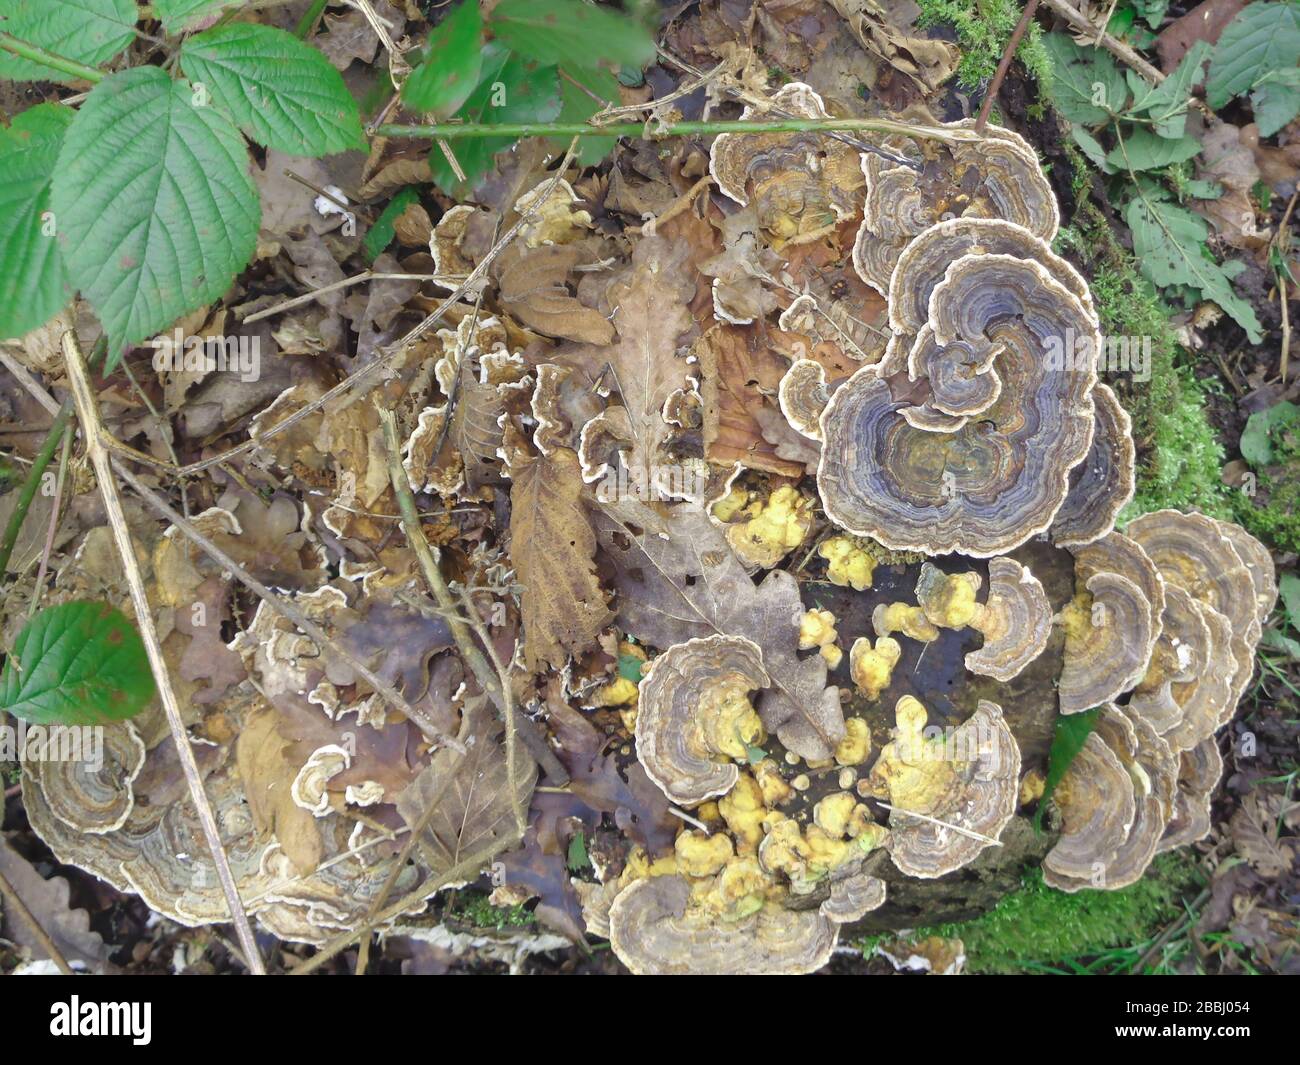 Bracket fungi on a woodland floor with leaf litter and wild blackberry leaves nature abstract found still-life Stock Photo